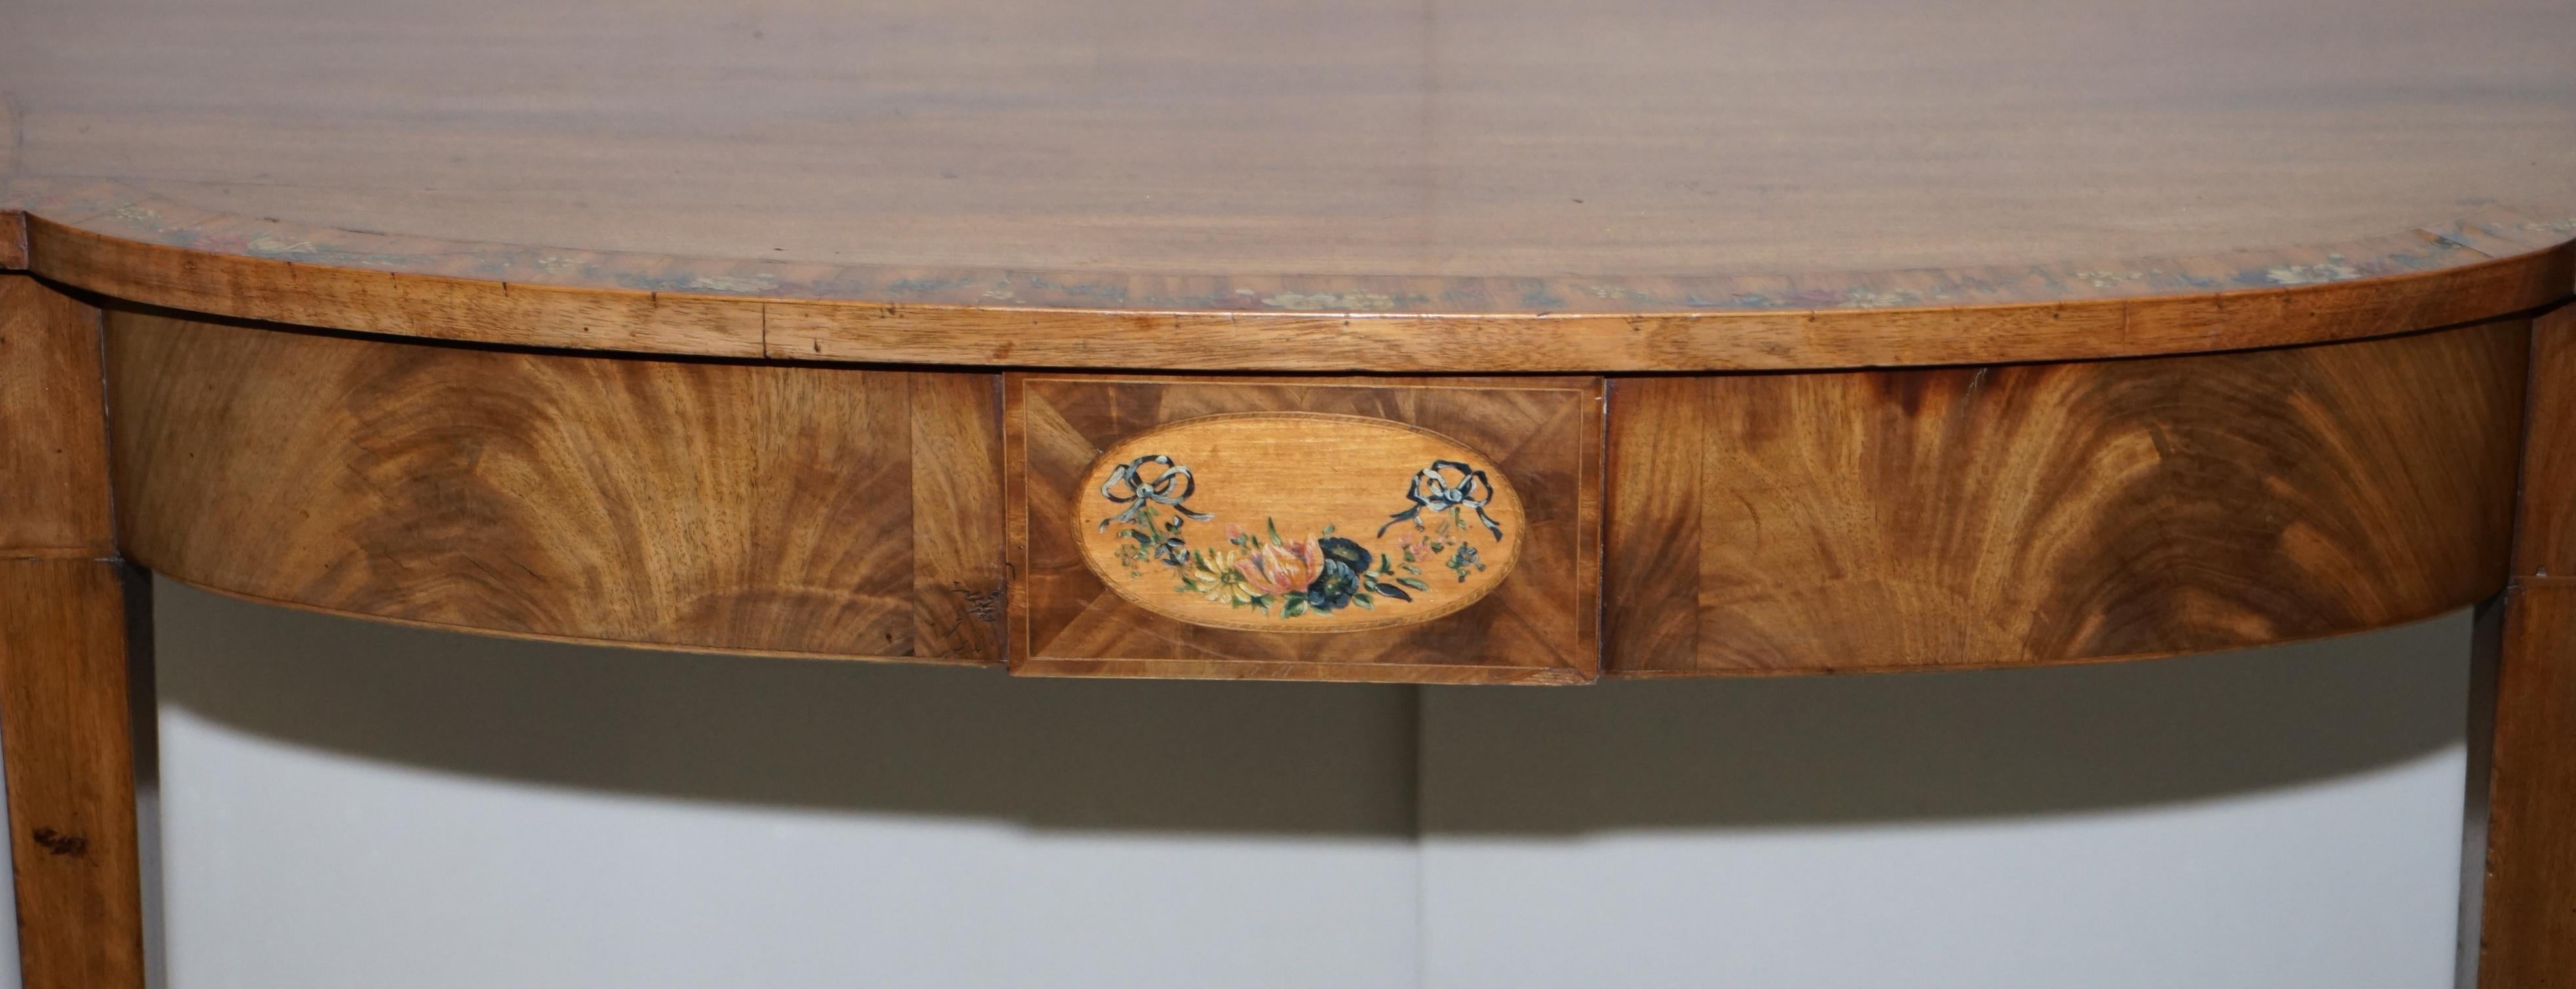 Pair of George III 1780 Satinwood & Tulip Wood Polychrome Painted Console Tables For Sale 12